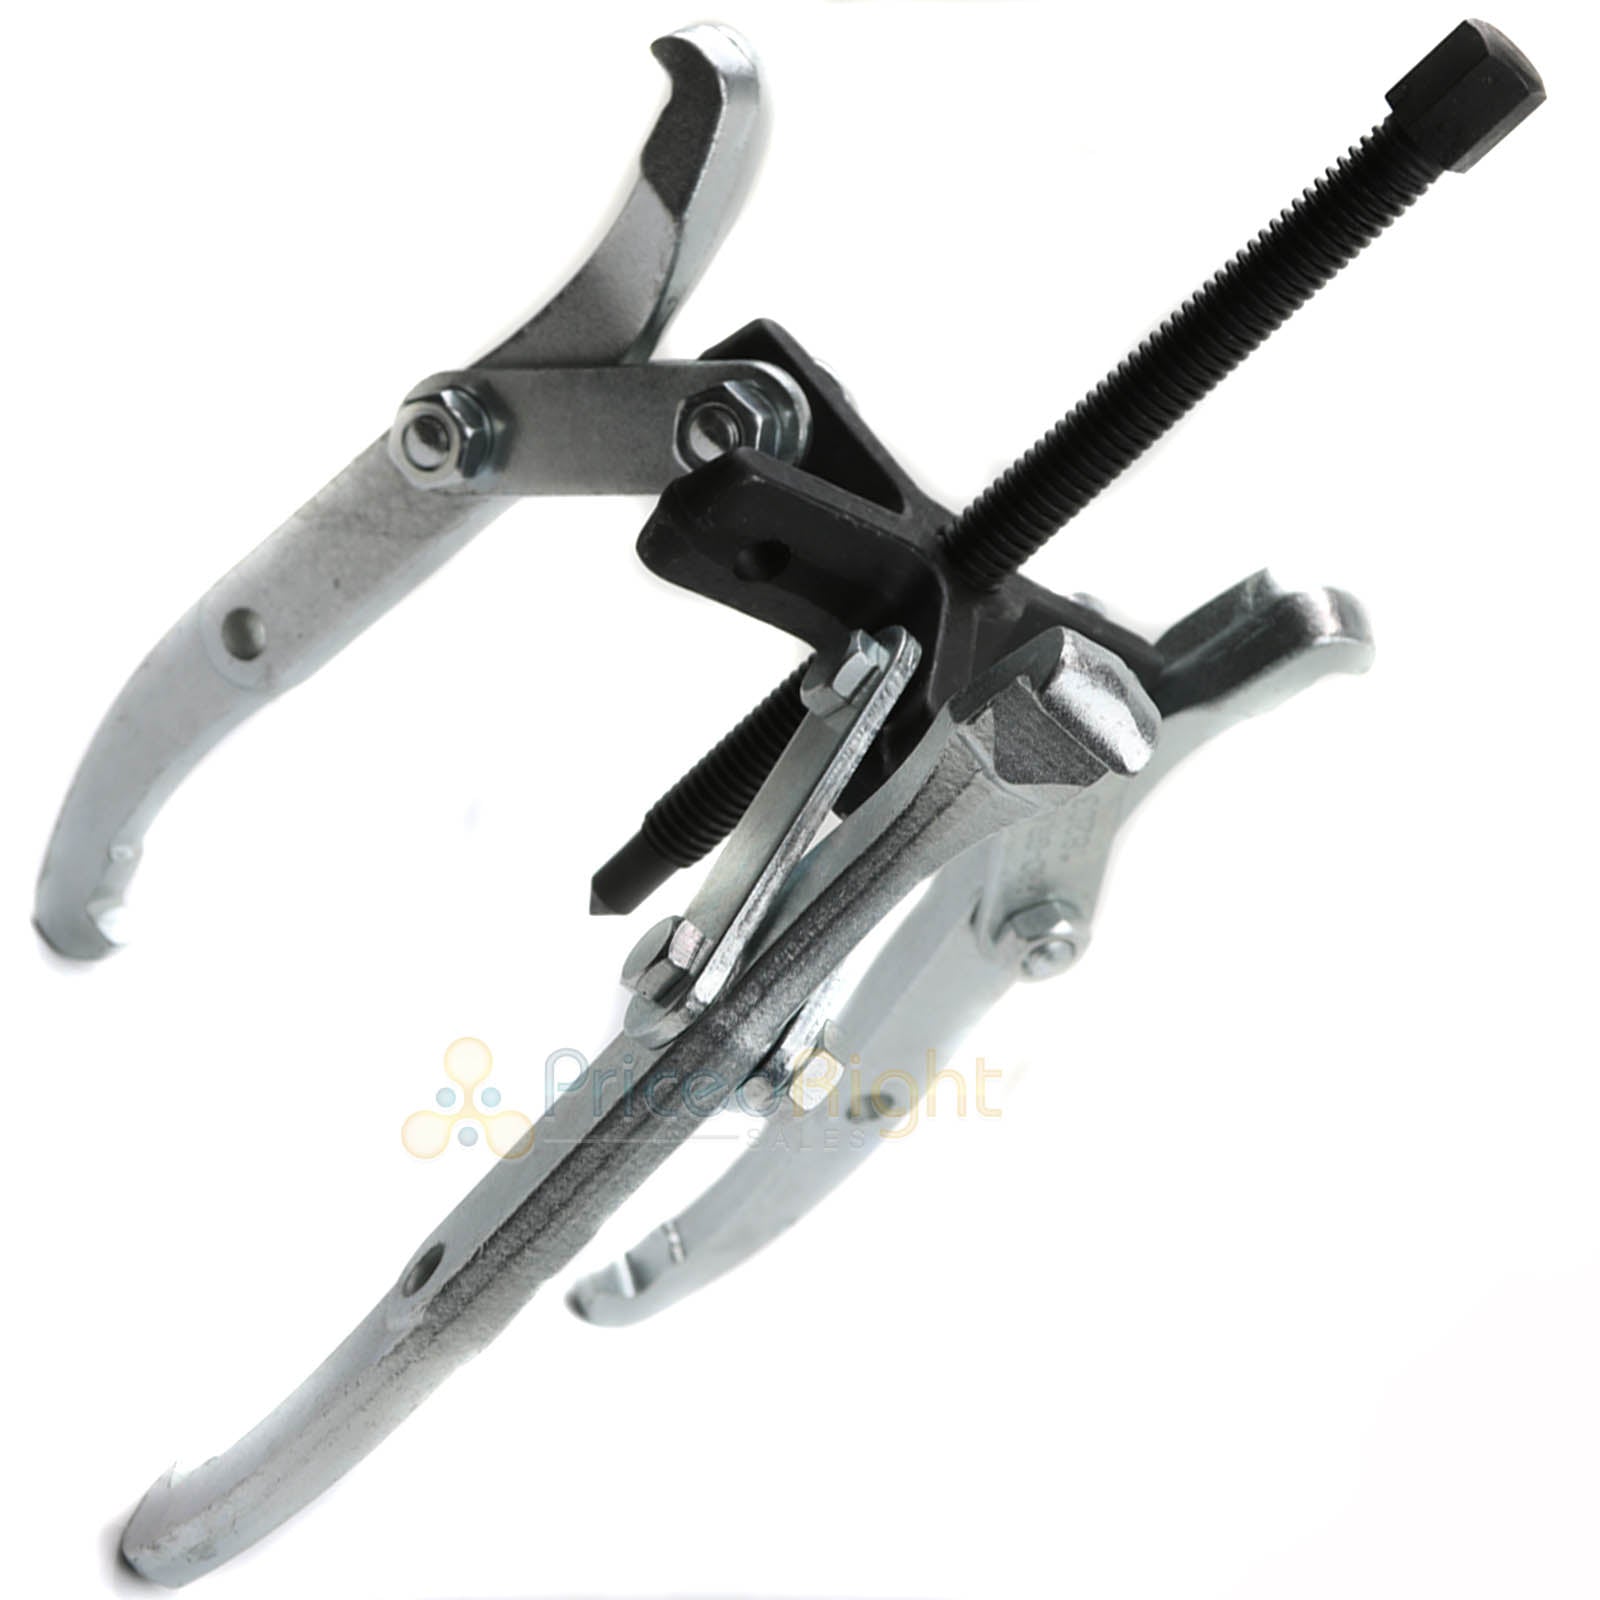 8 Inch Gear Puller Adjustable Combination 2 & 3 Jaw Reversible 6 Ton Capacity